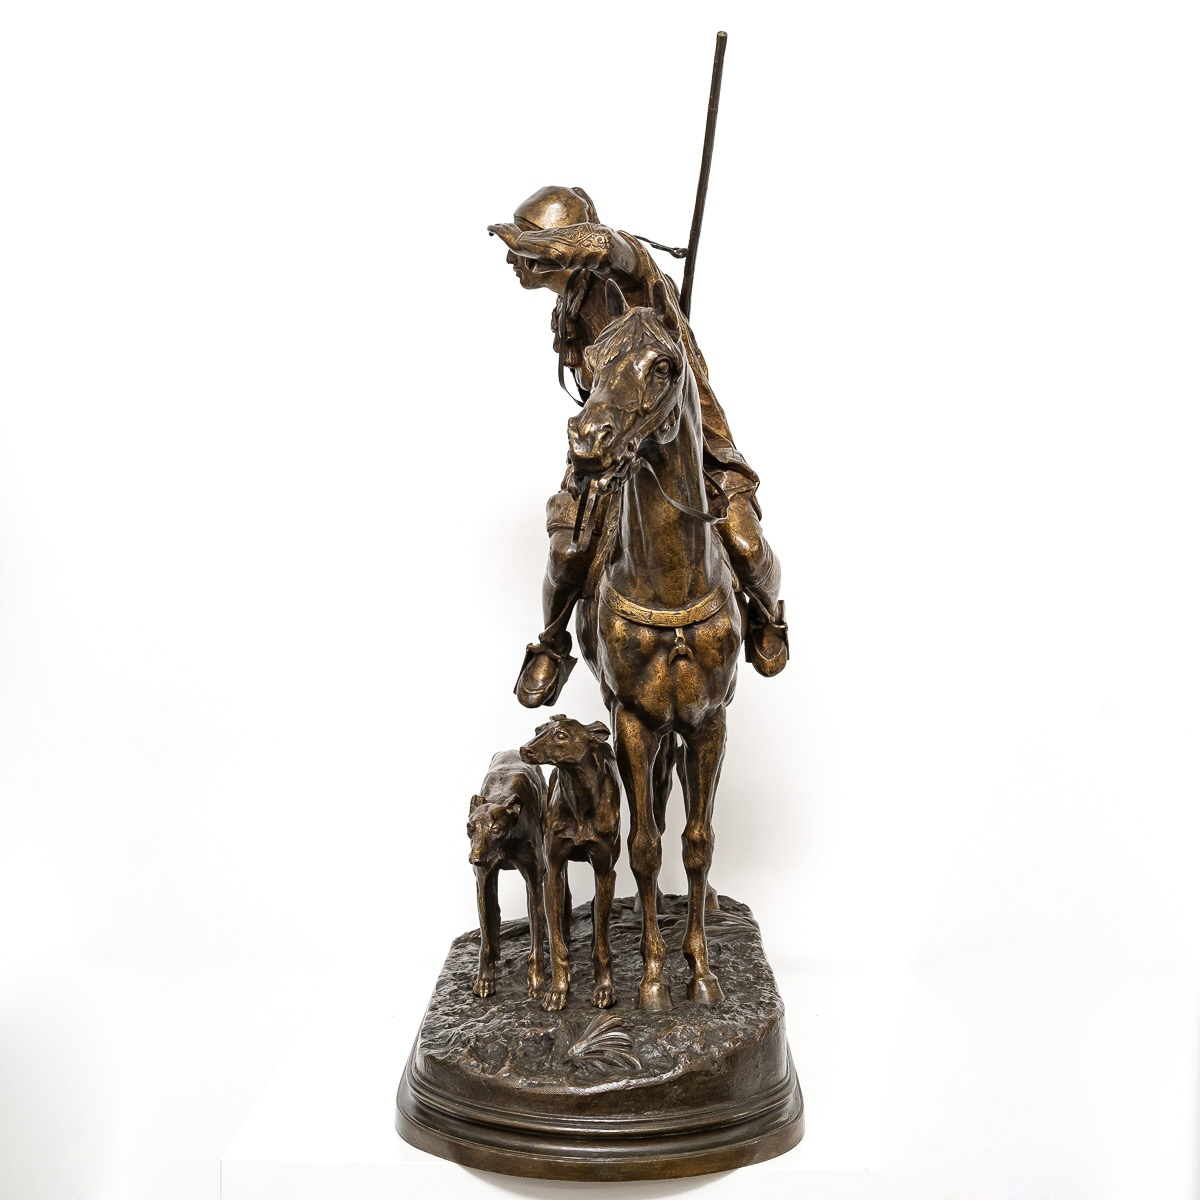 The Scout Statue